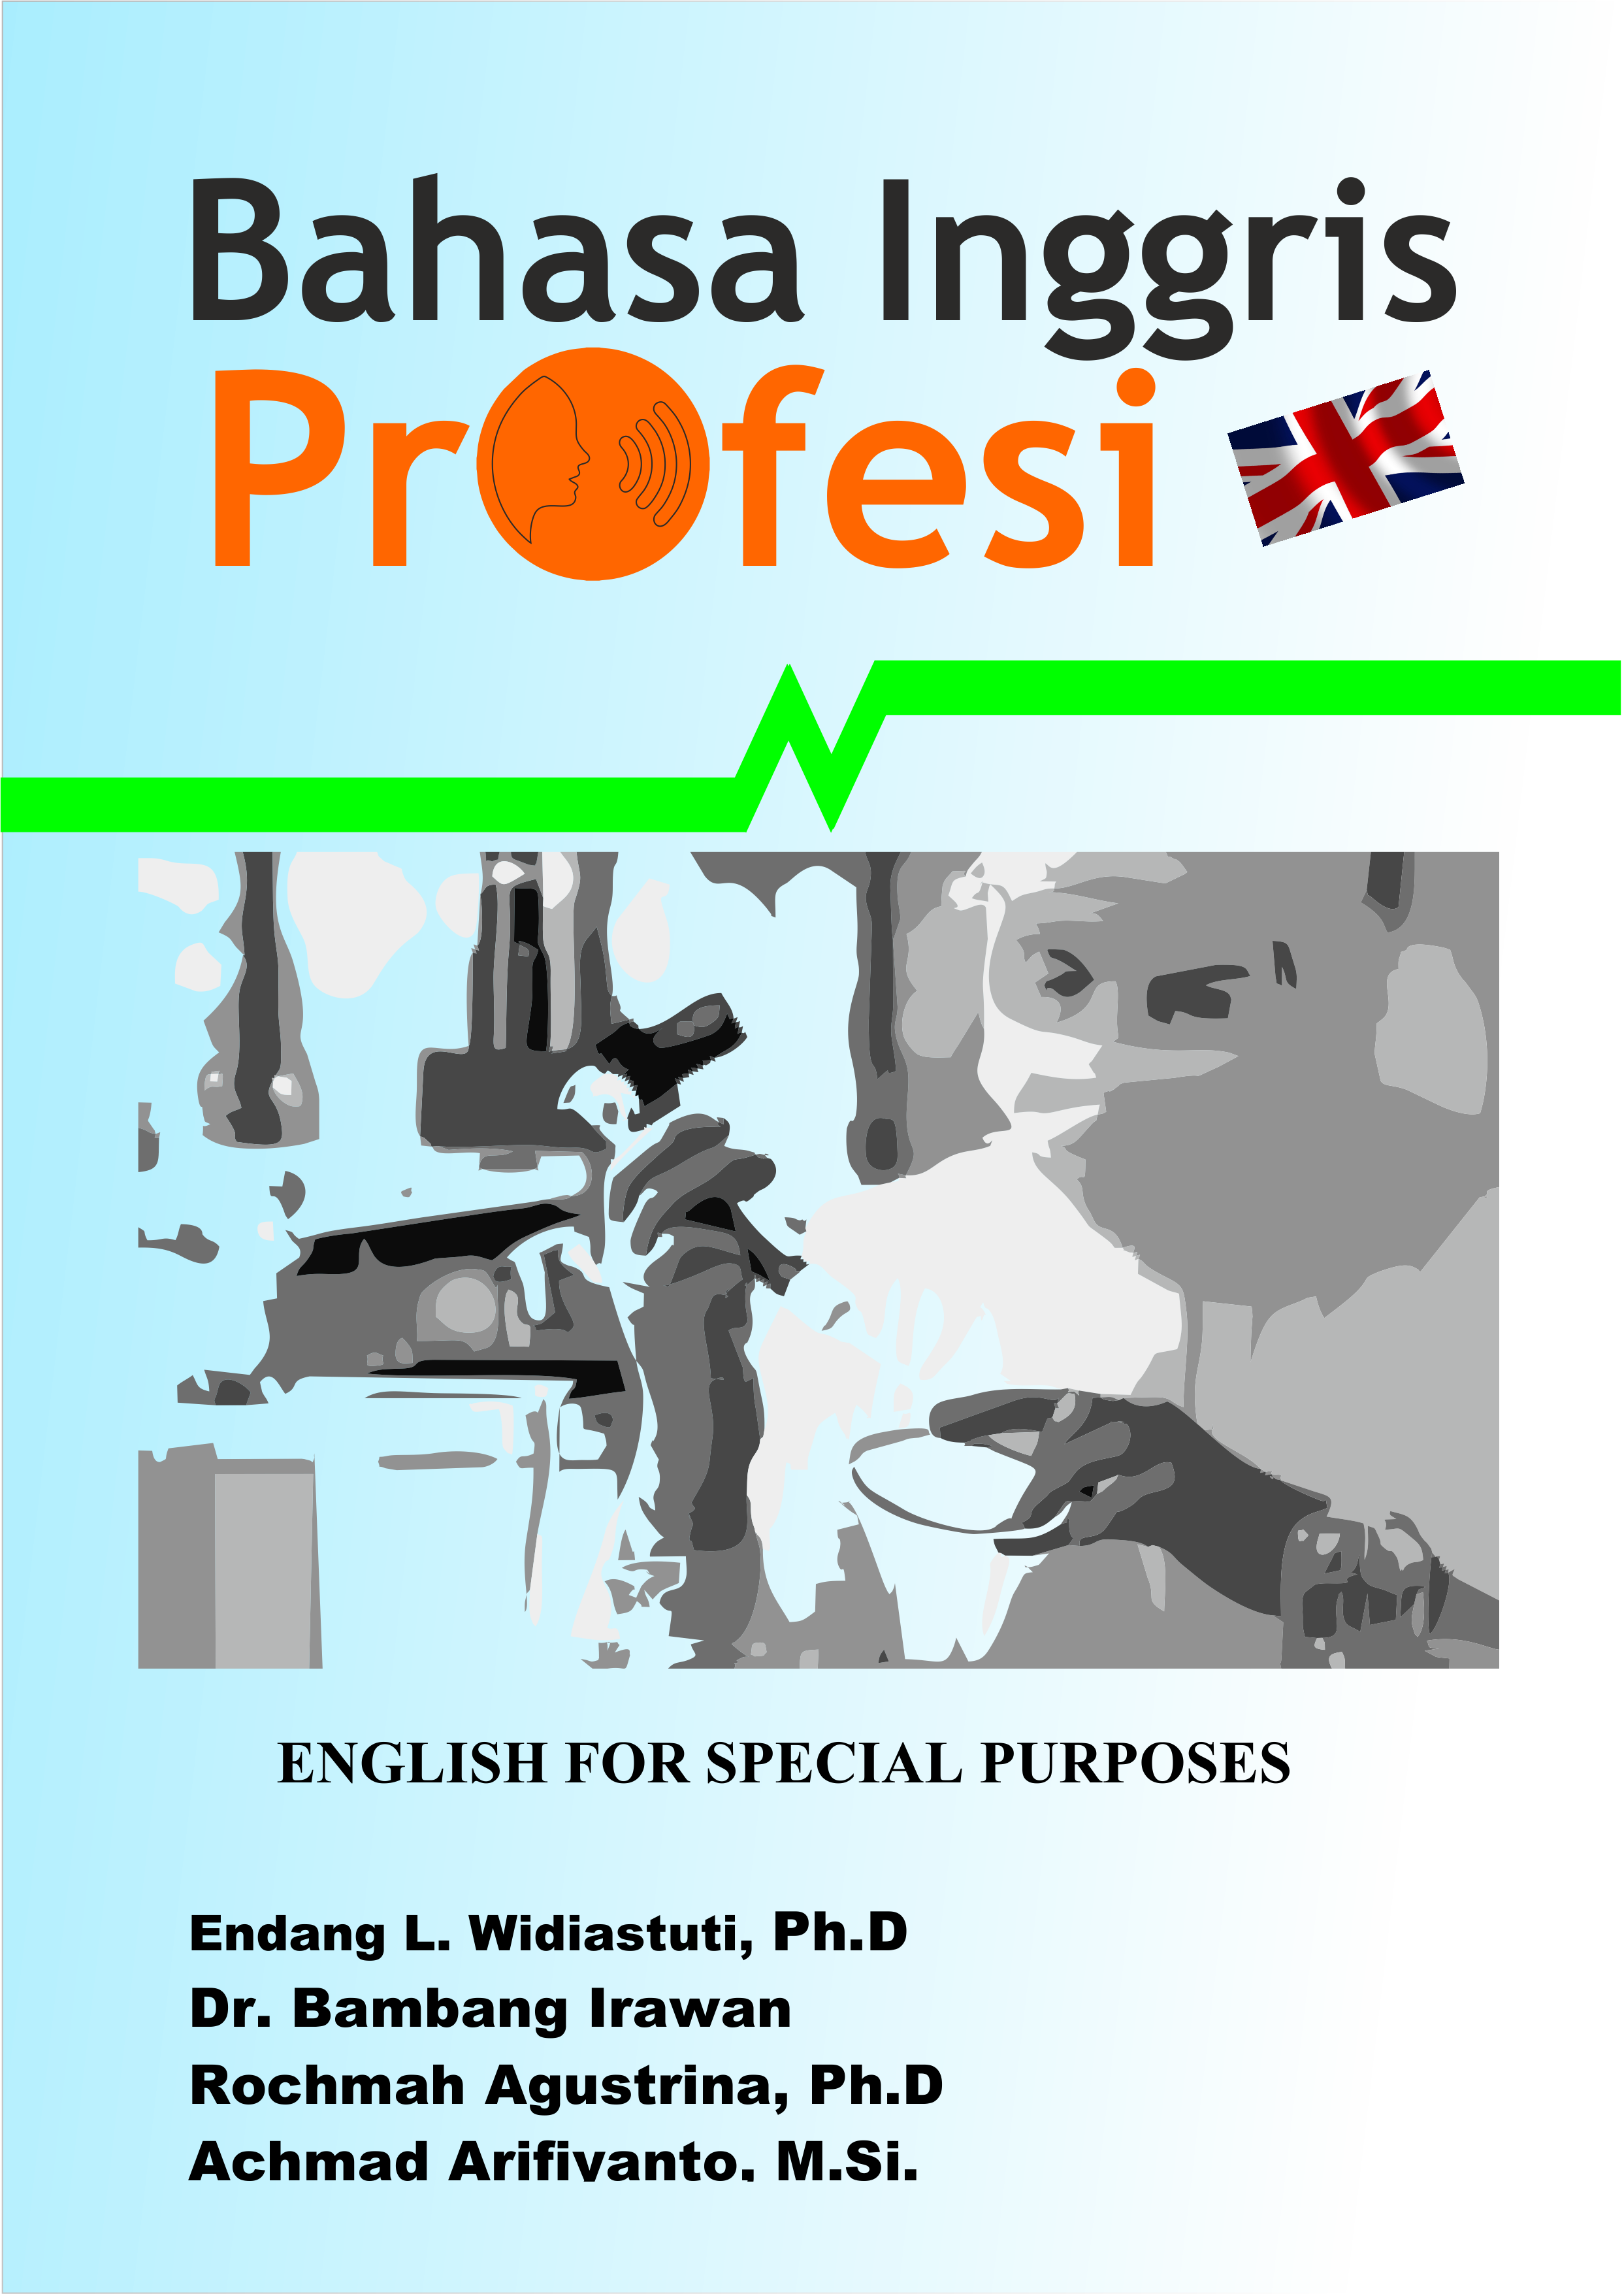 English for Special Purpose Class A